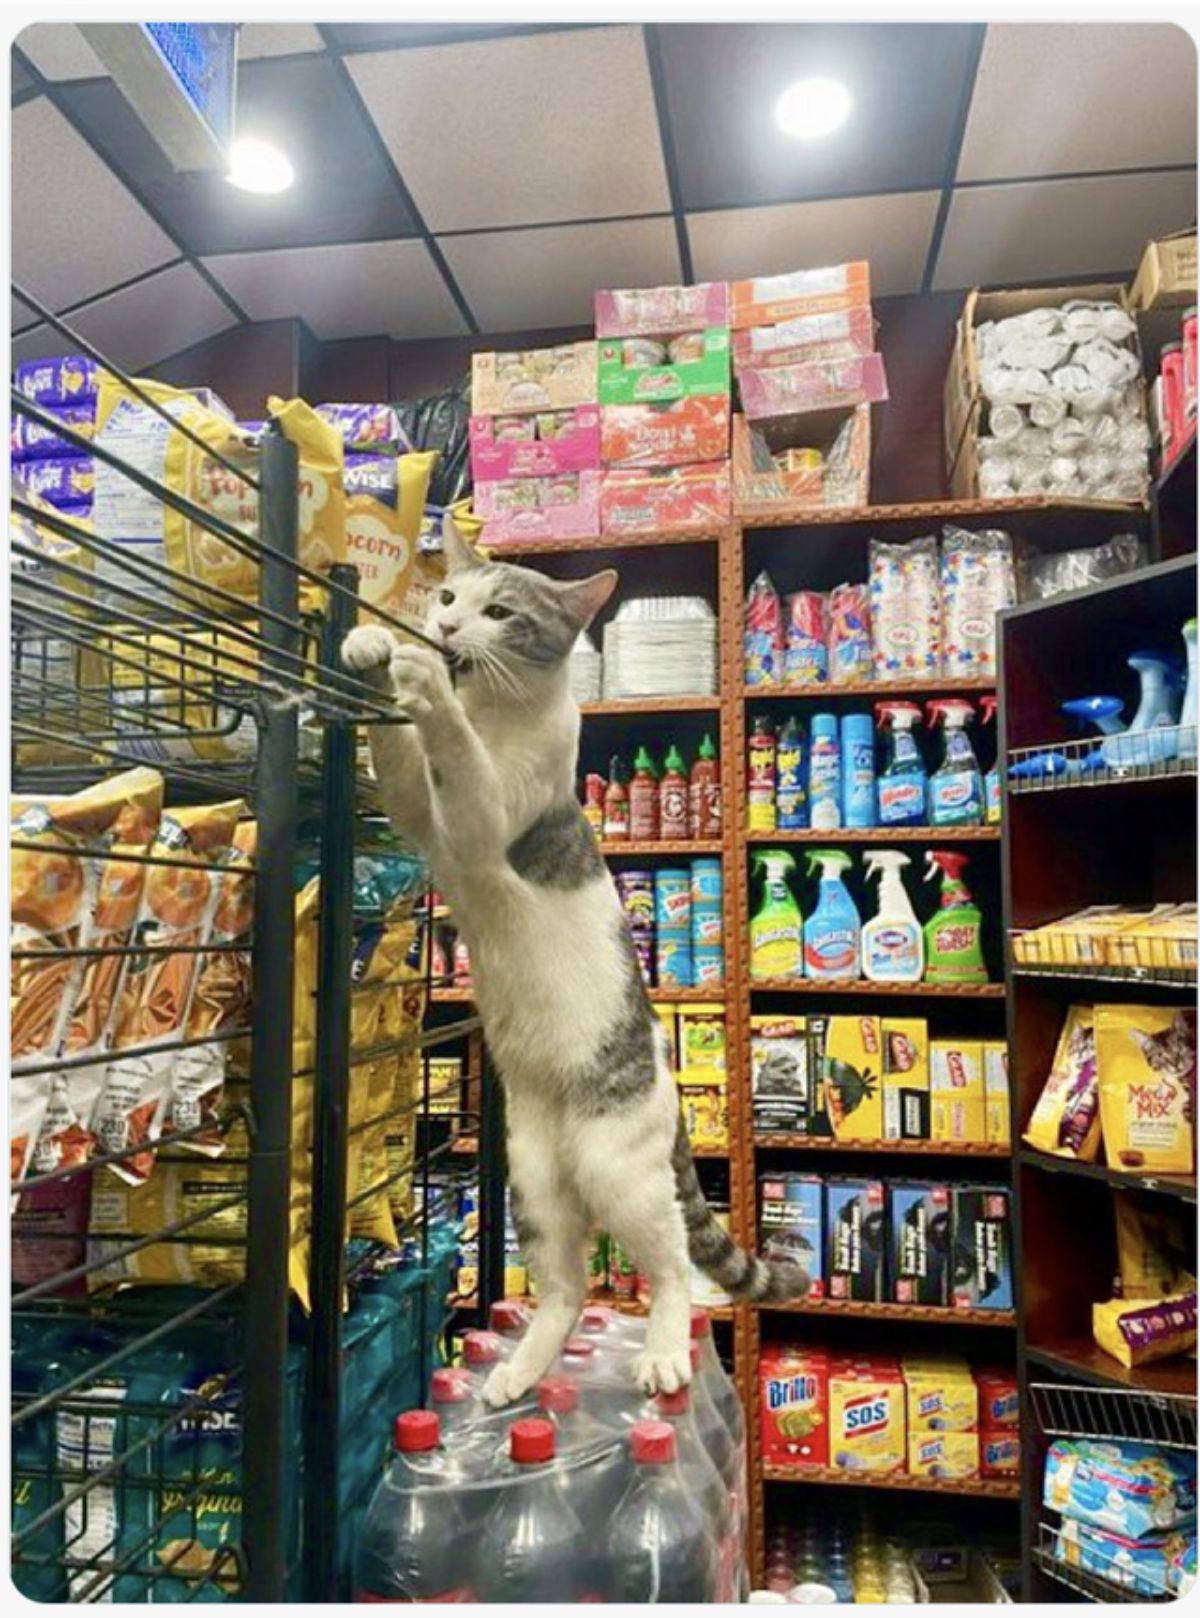 grey and white tabby cat standing on hind legs on a [ack of coke bottles and biting a metal shelf